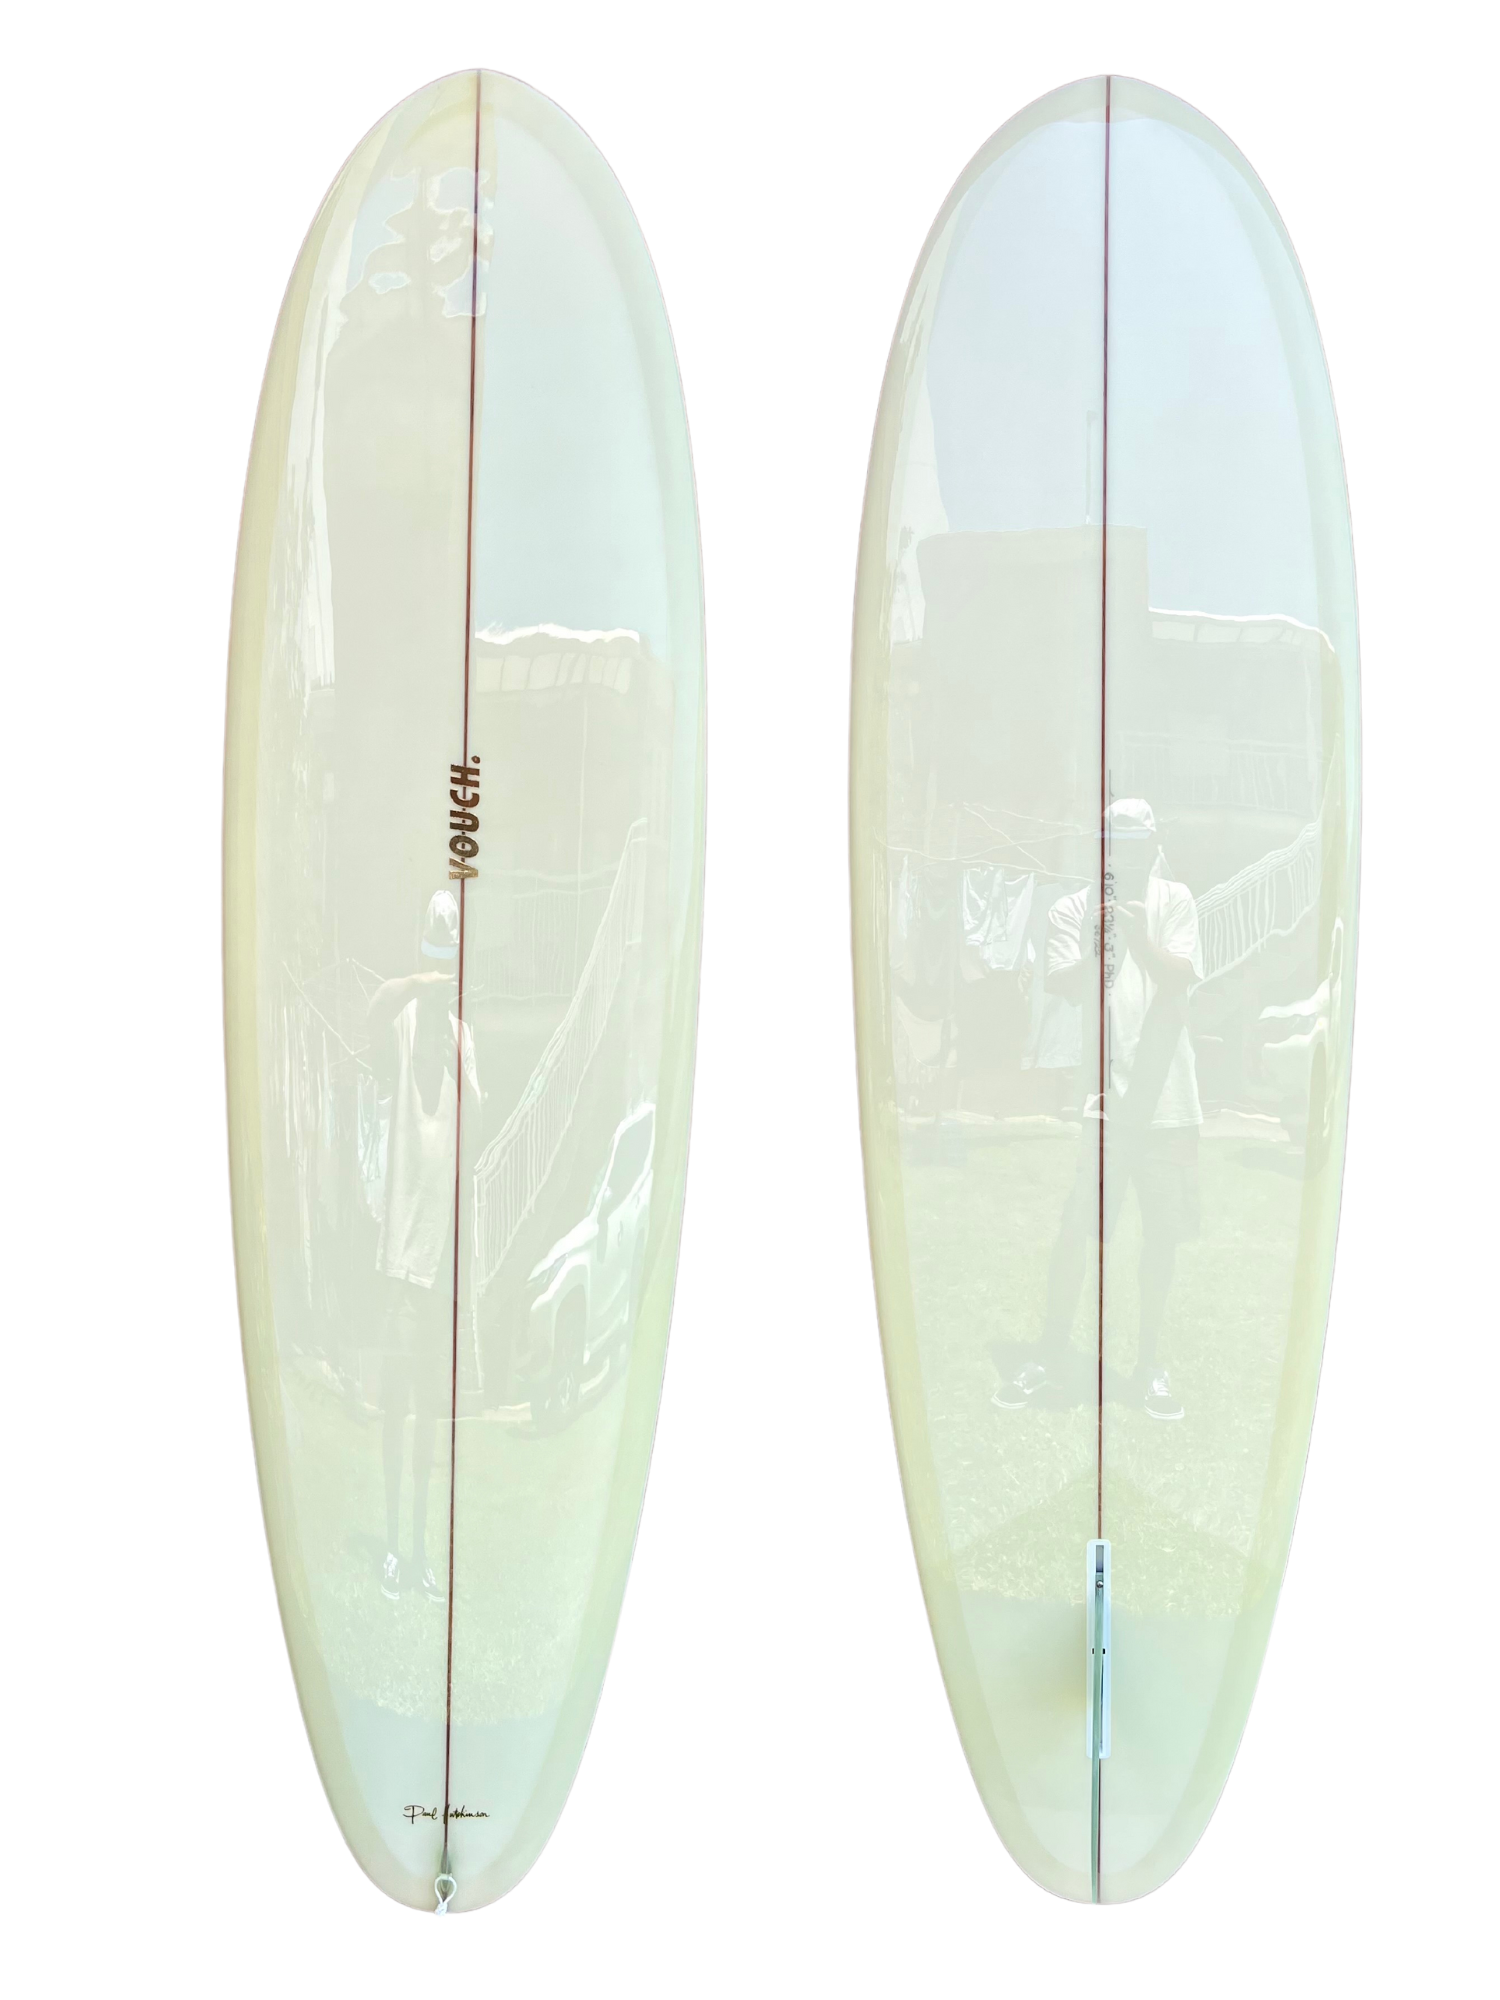 Vouch Displacement Hull 6'10"